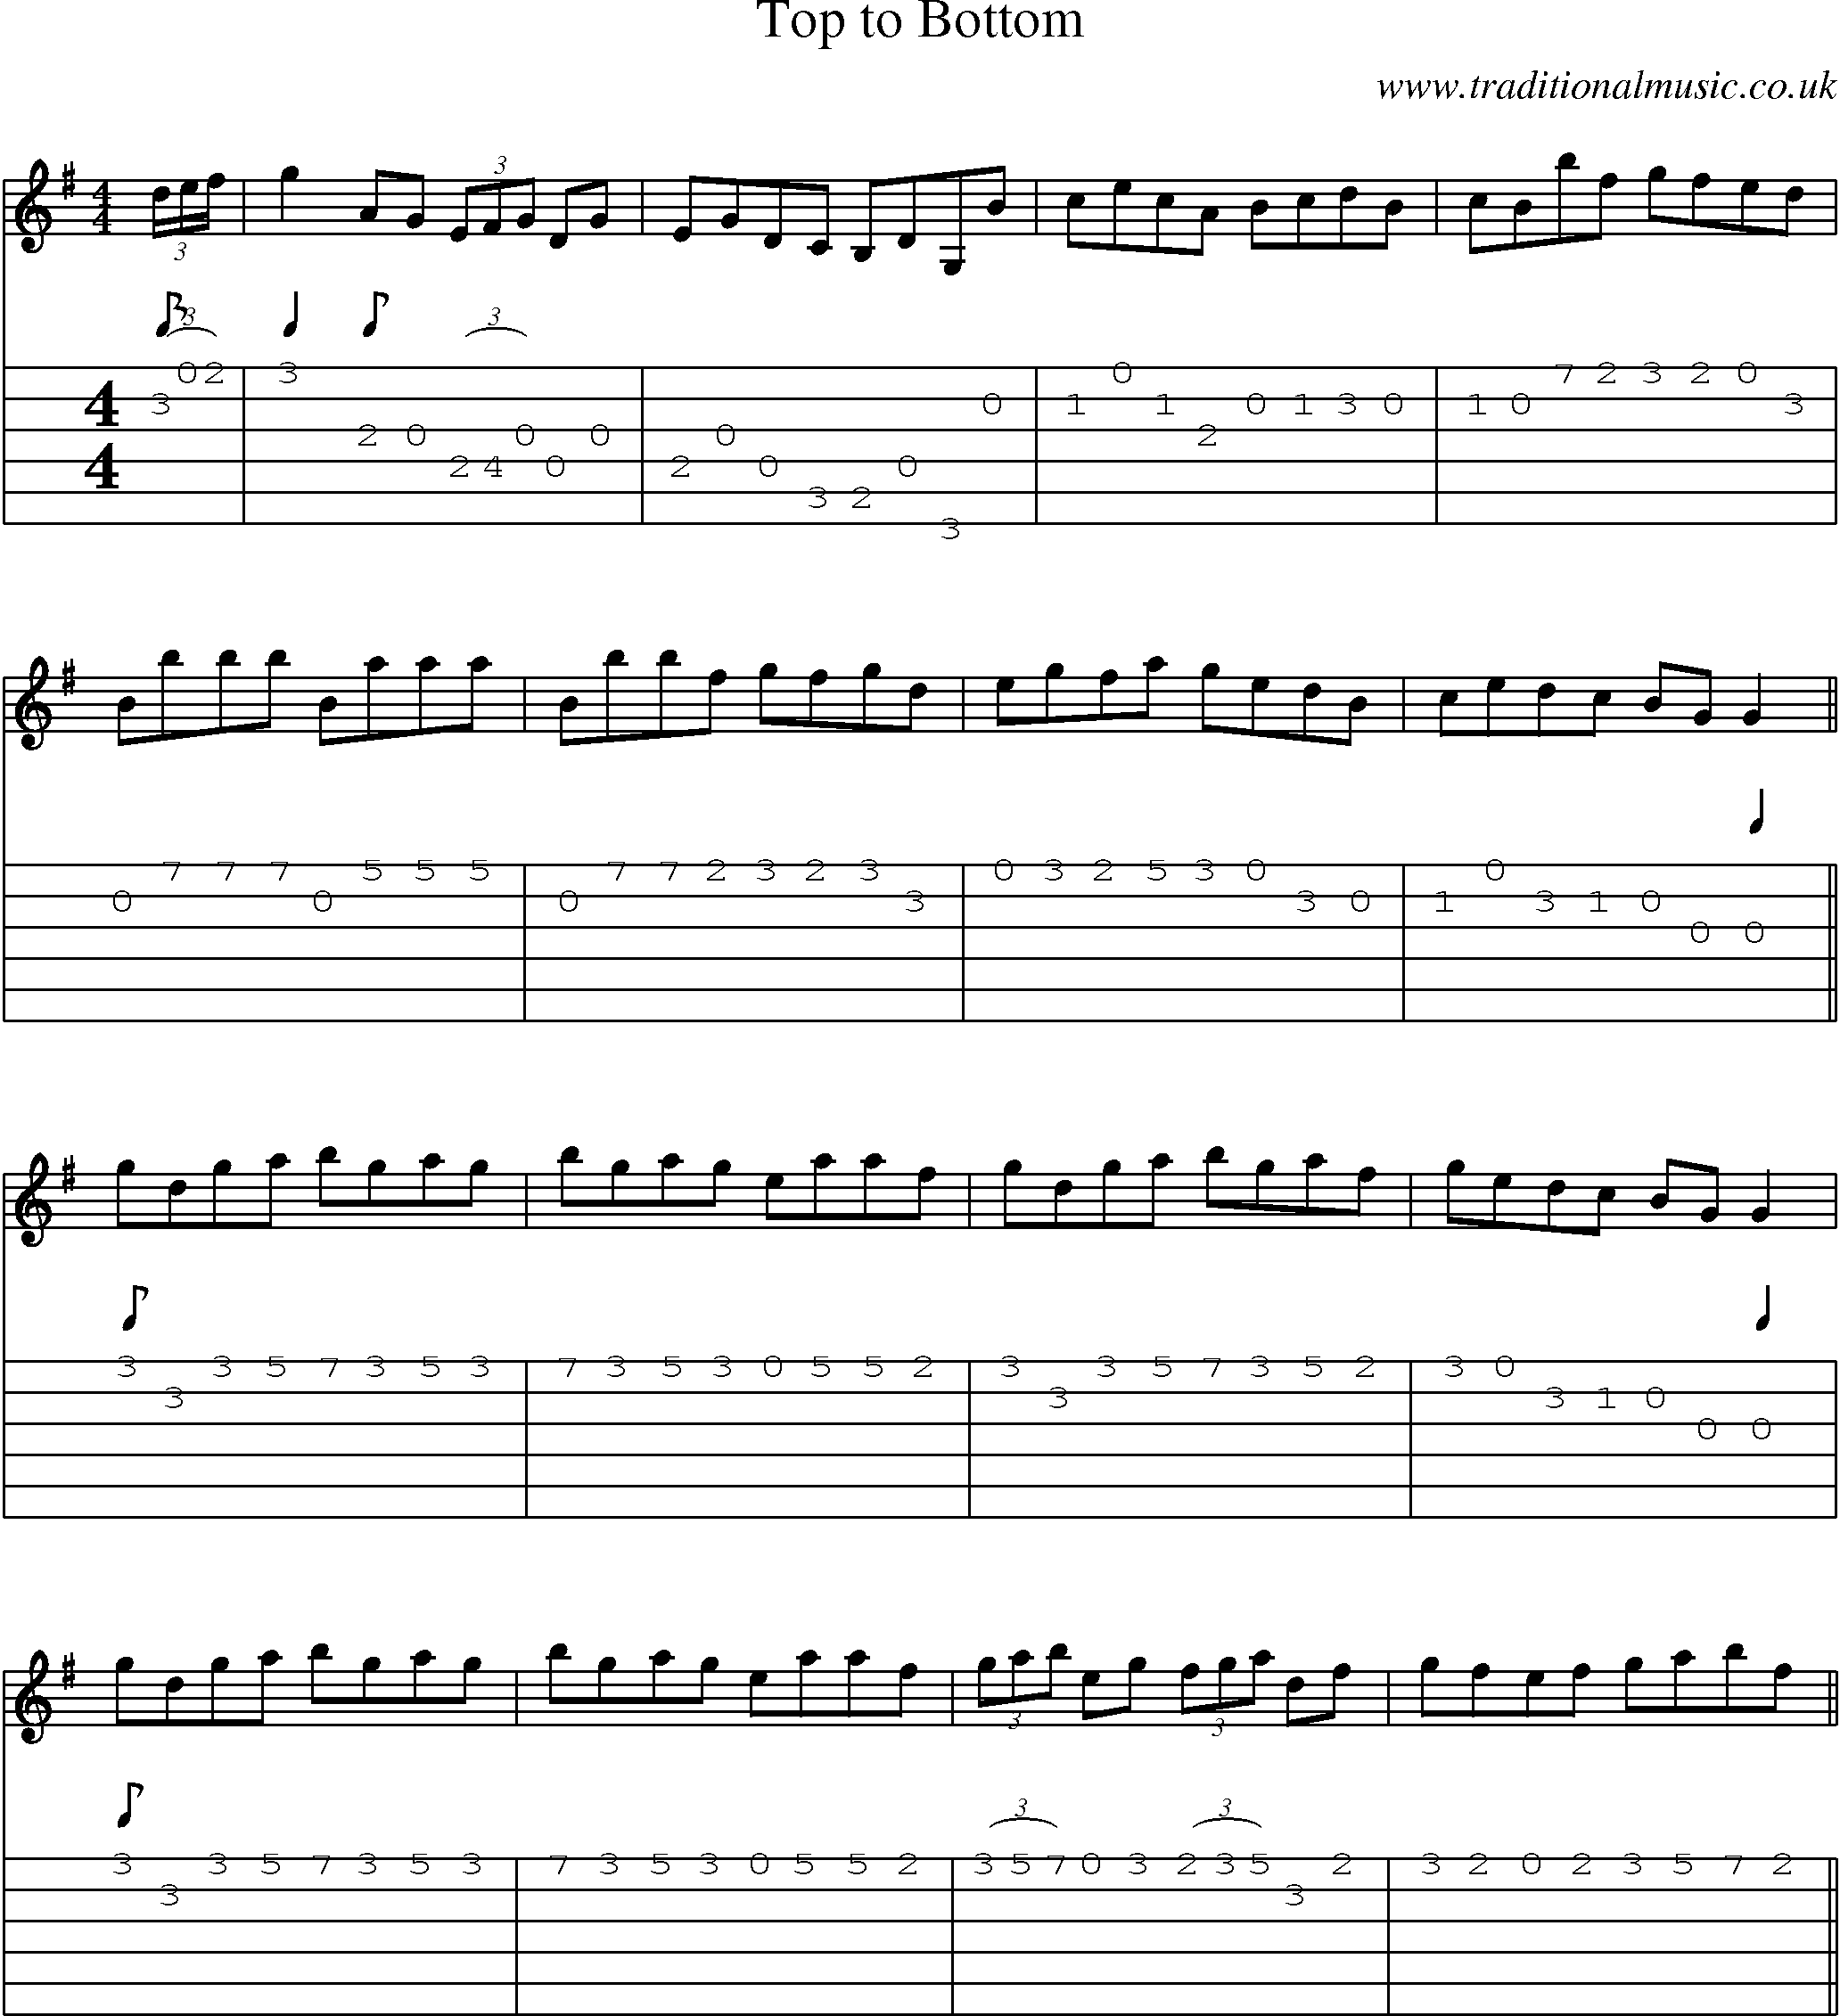 Music Score and Guitar Tabs for Top To Bottom